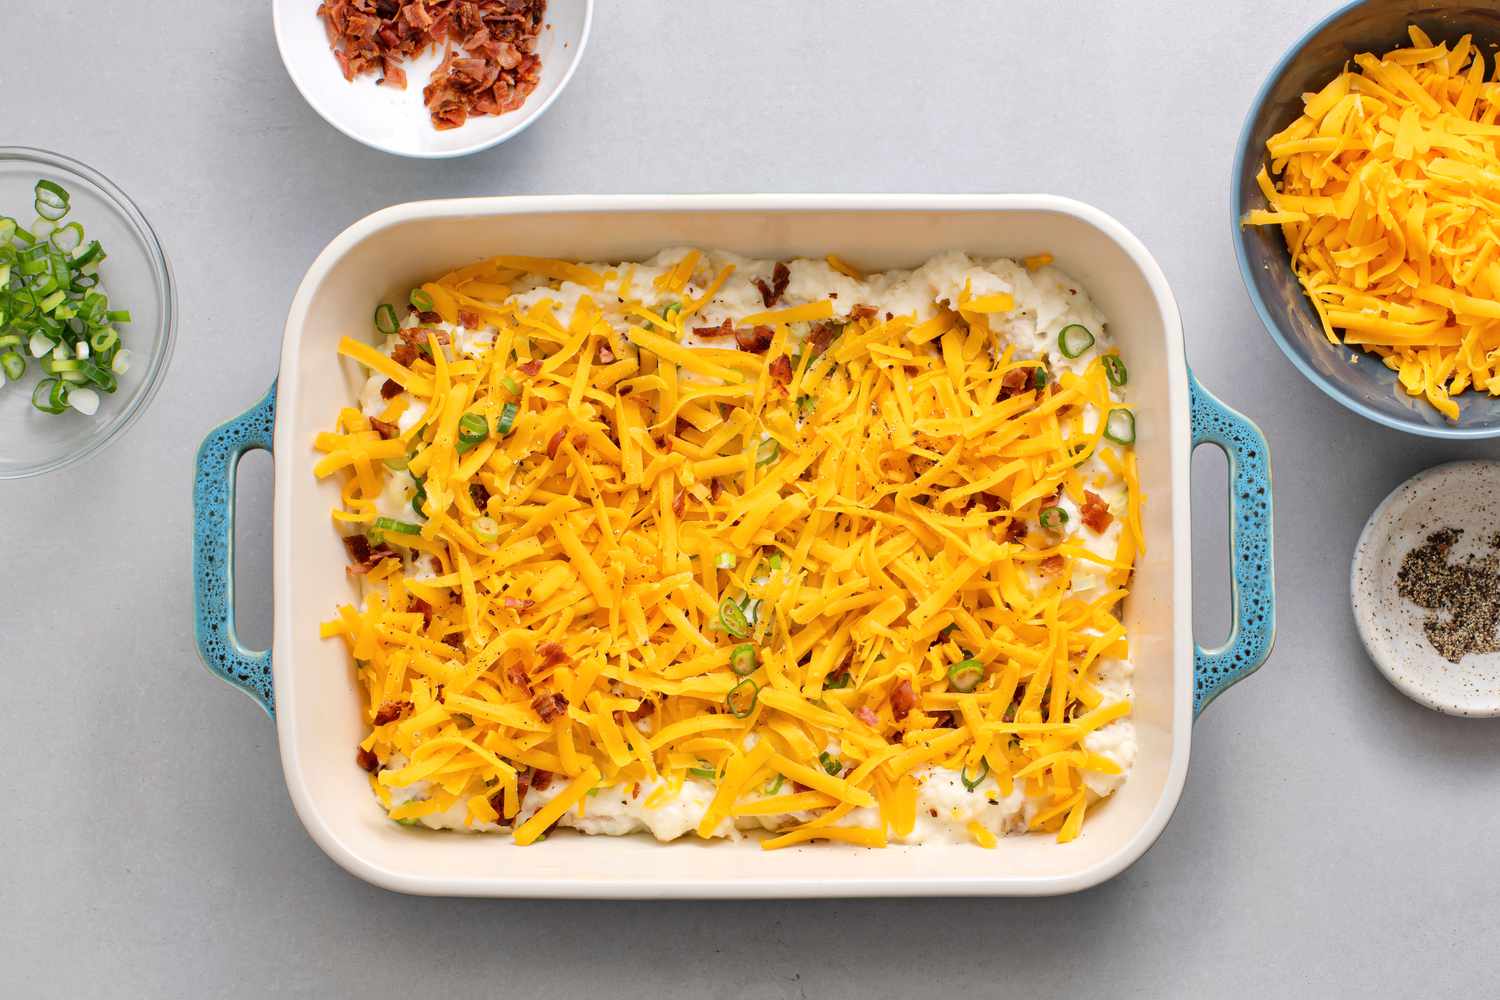 bacon, scallions, and cheddar cheese in a baking dish